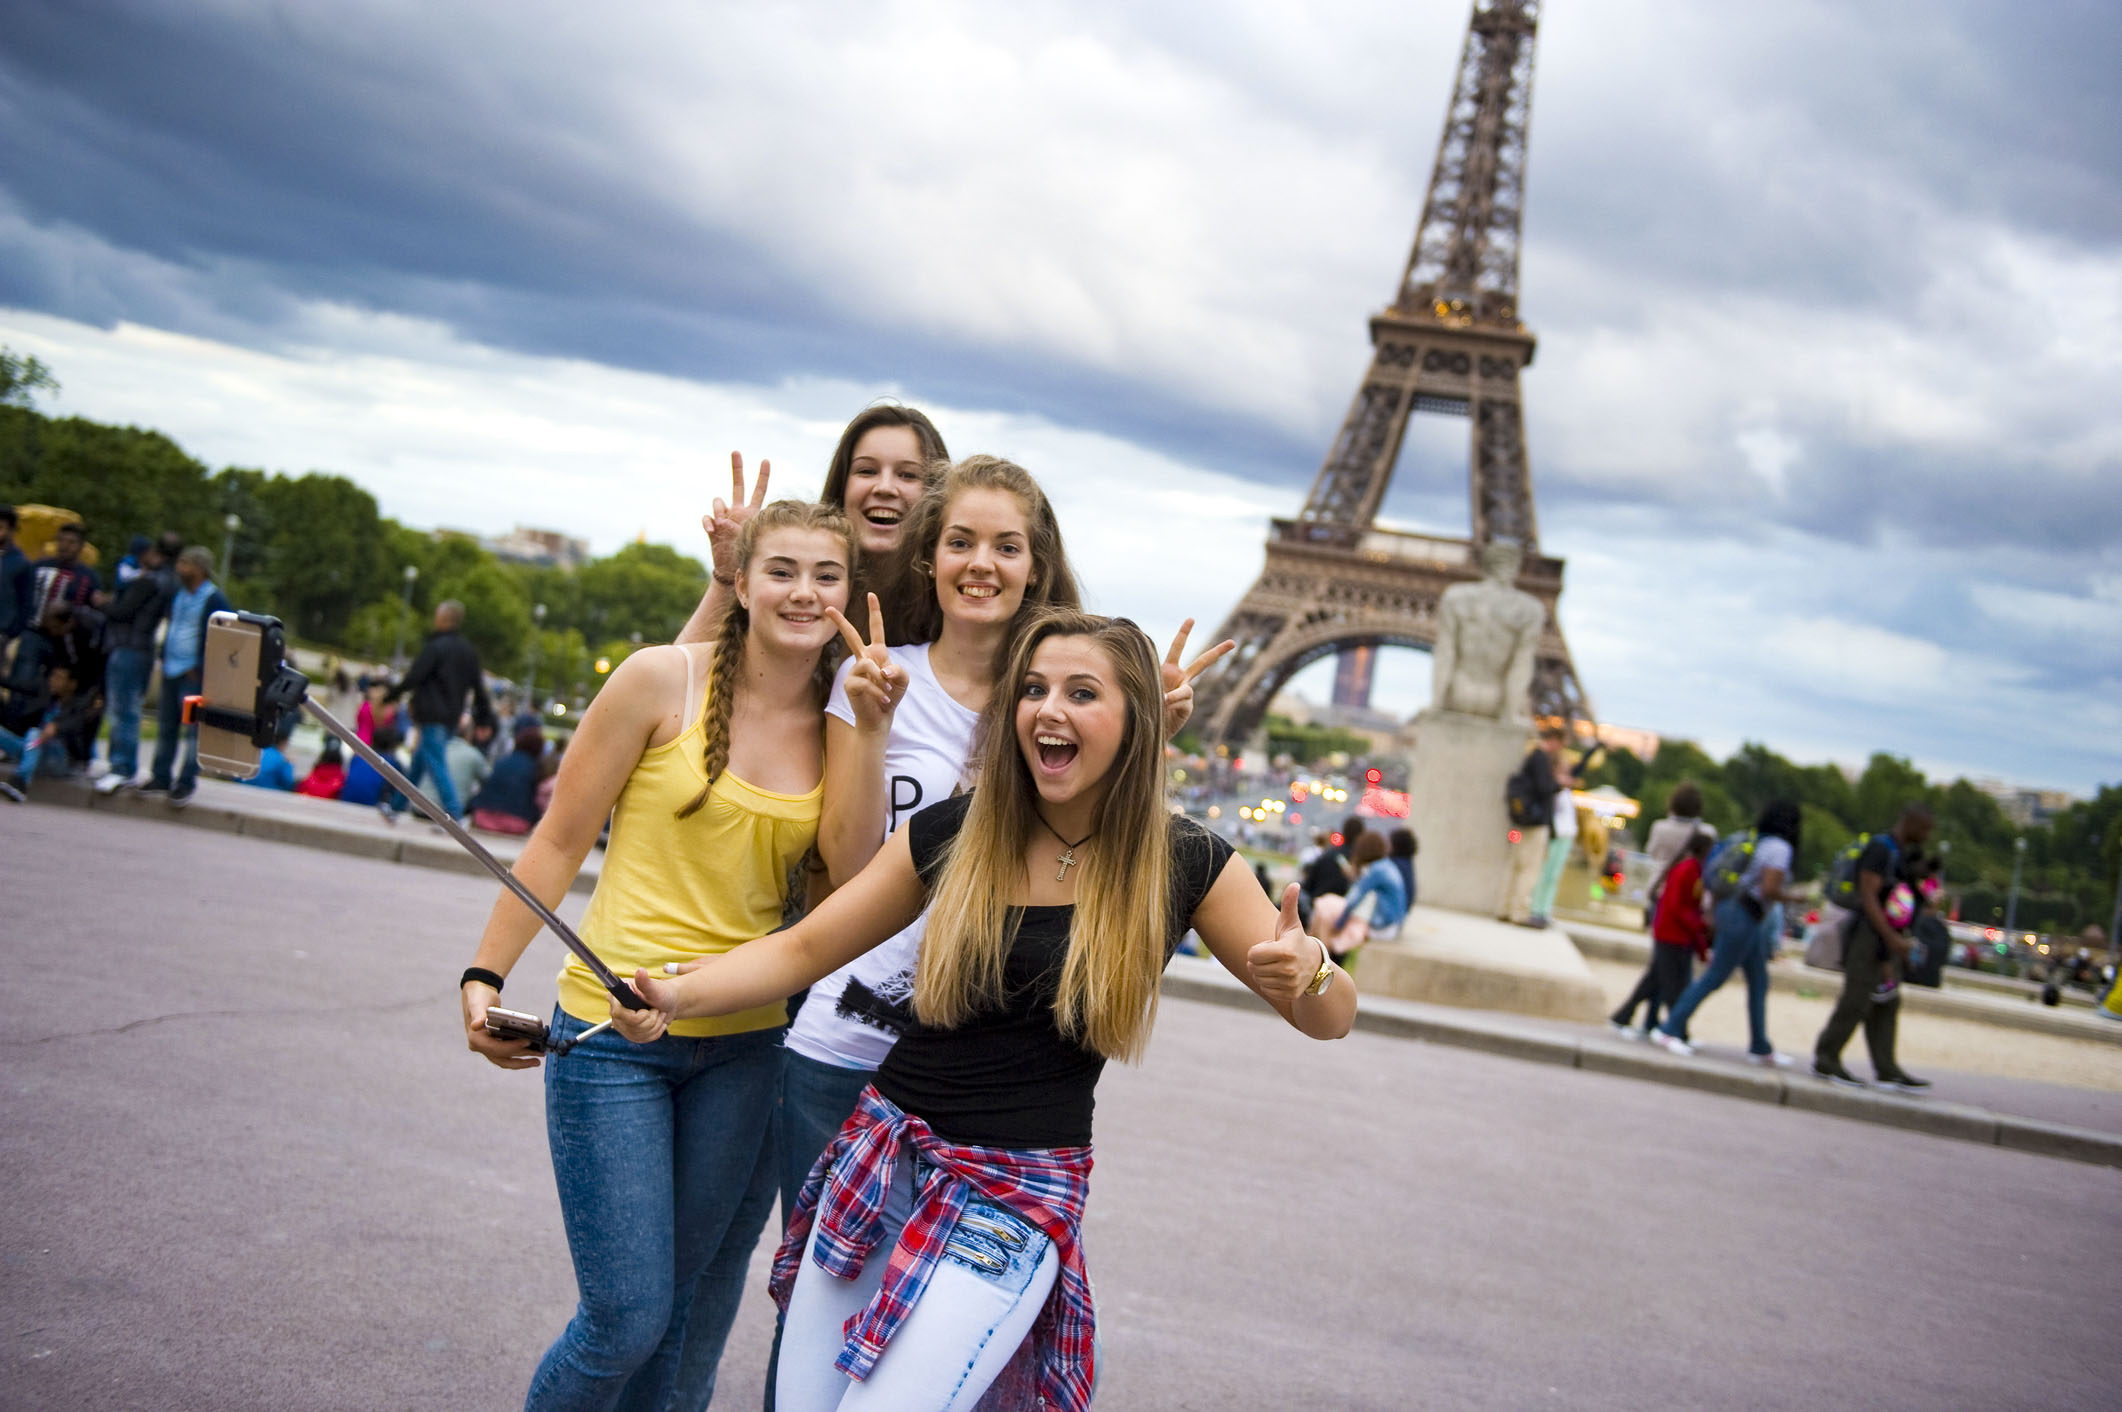 Study in France to improve your French language skills through classes and cultural immersion. Visit the world’s most celebrated art museums in Paris and go on a quest to capture the city’s charm under the guidance of a French photographer. There is no better way to study abroad in France! Students in front of the Eiffel Tower